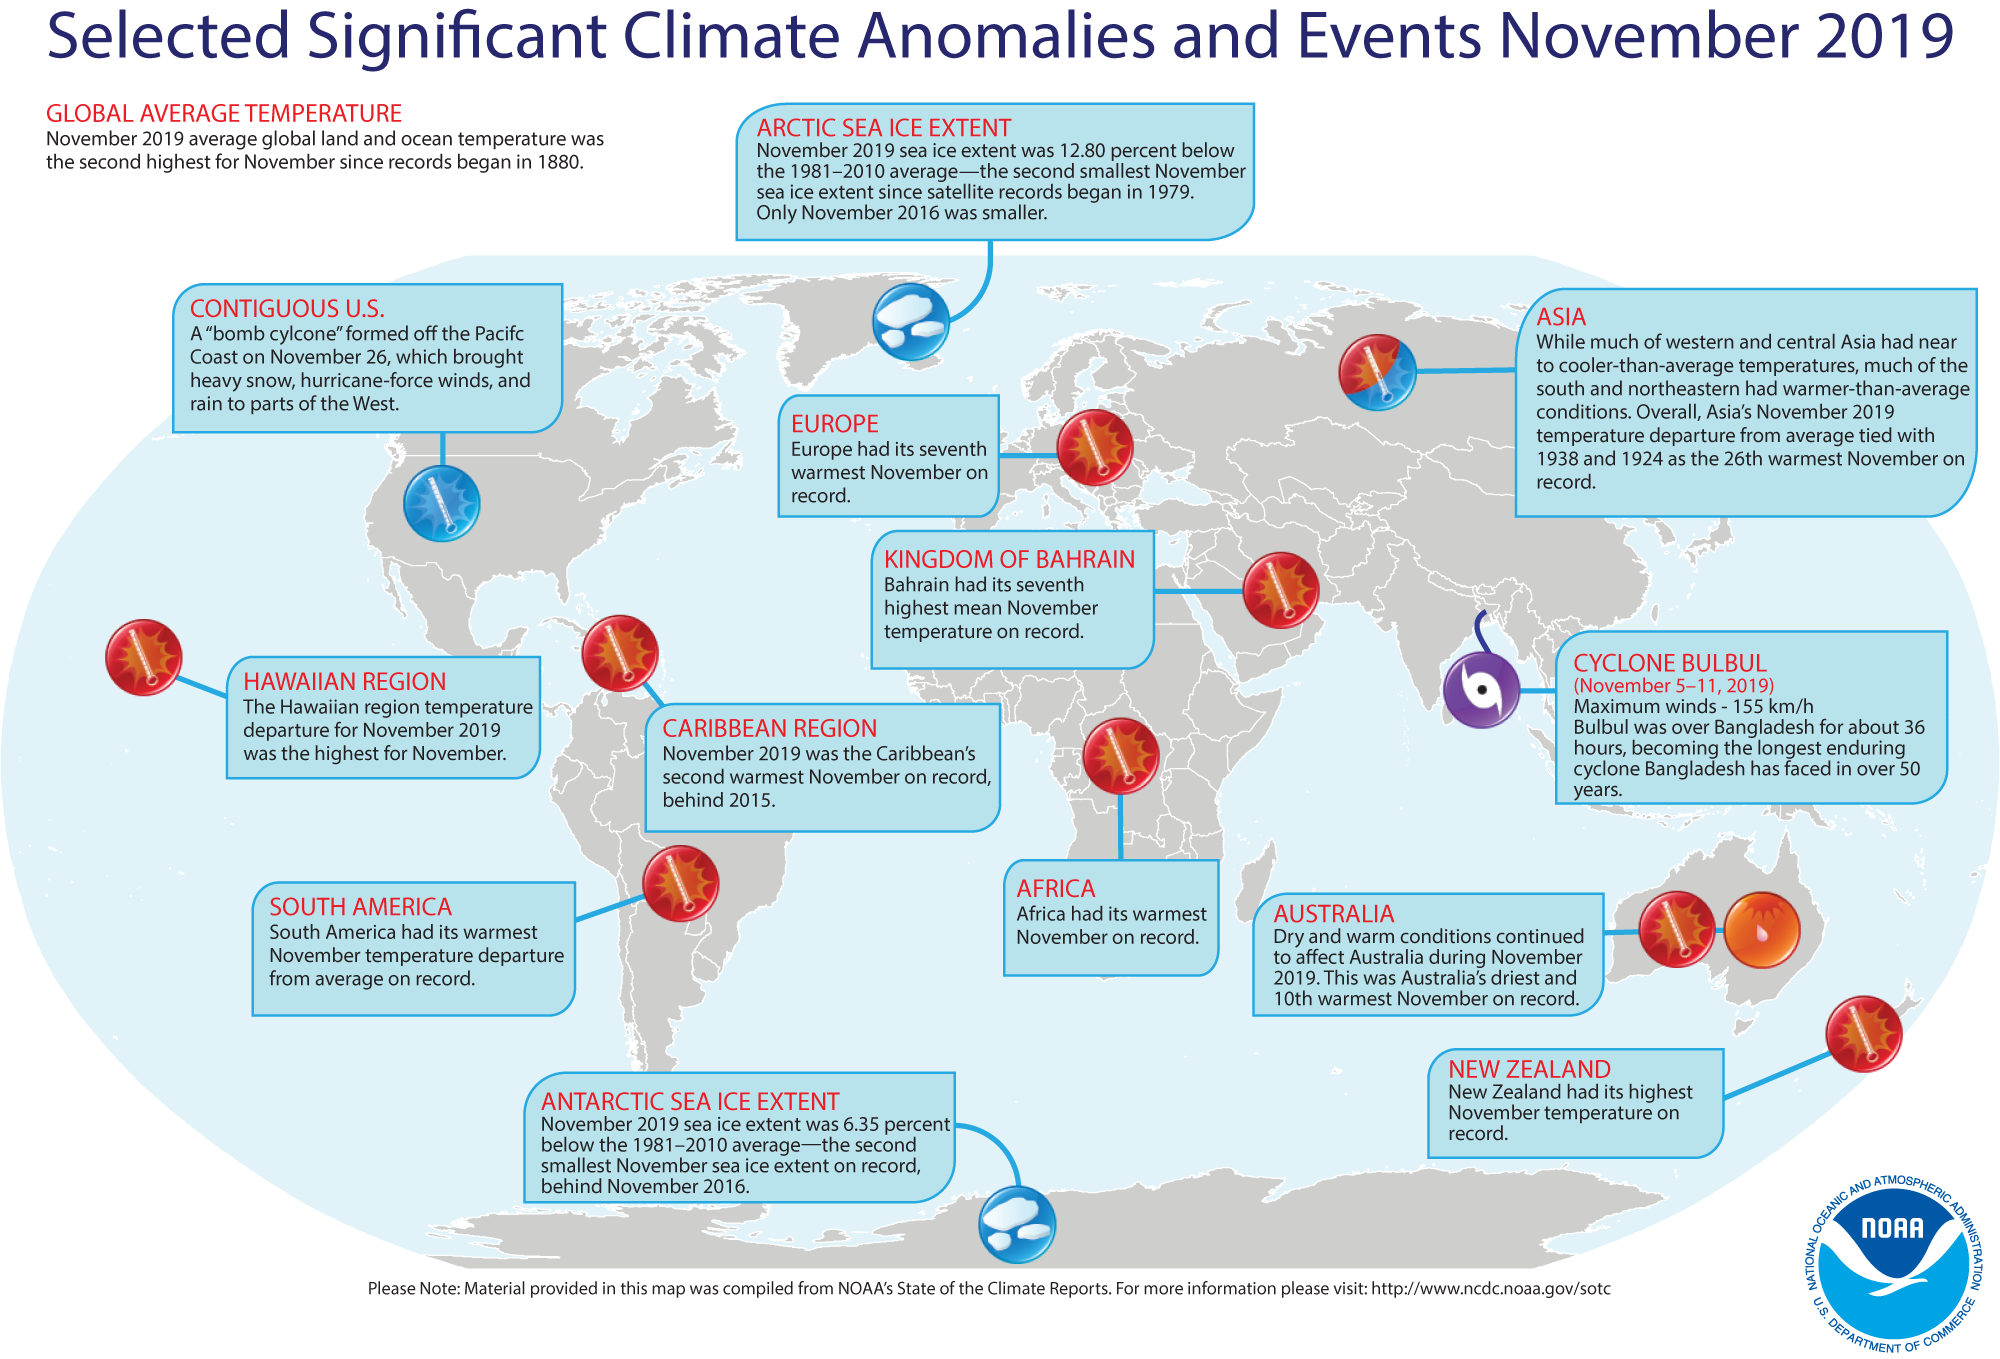 An annotated map showing notable climate events that occurred around the world in  November 2019. For details, see the short bulleted list below in our story and at http://bit.ly/Global201911.